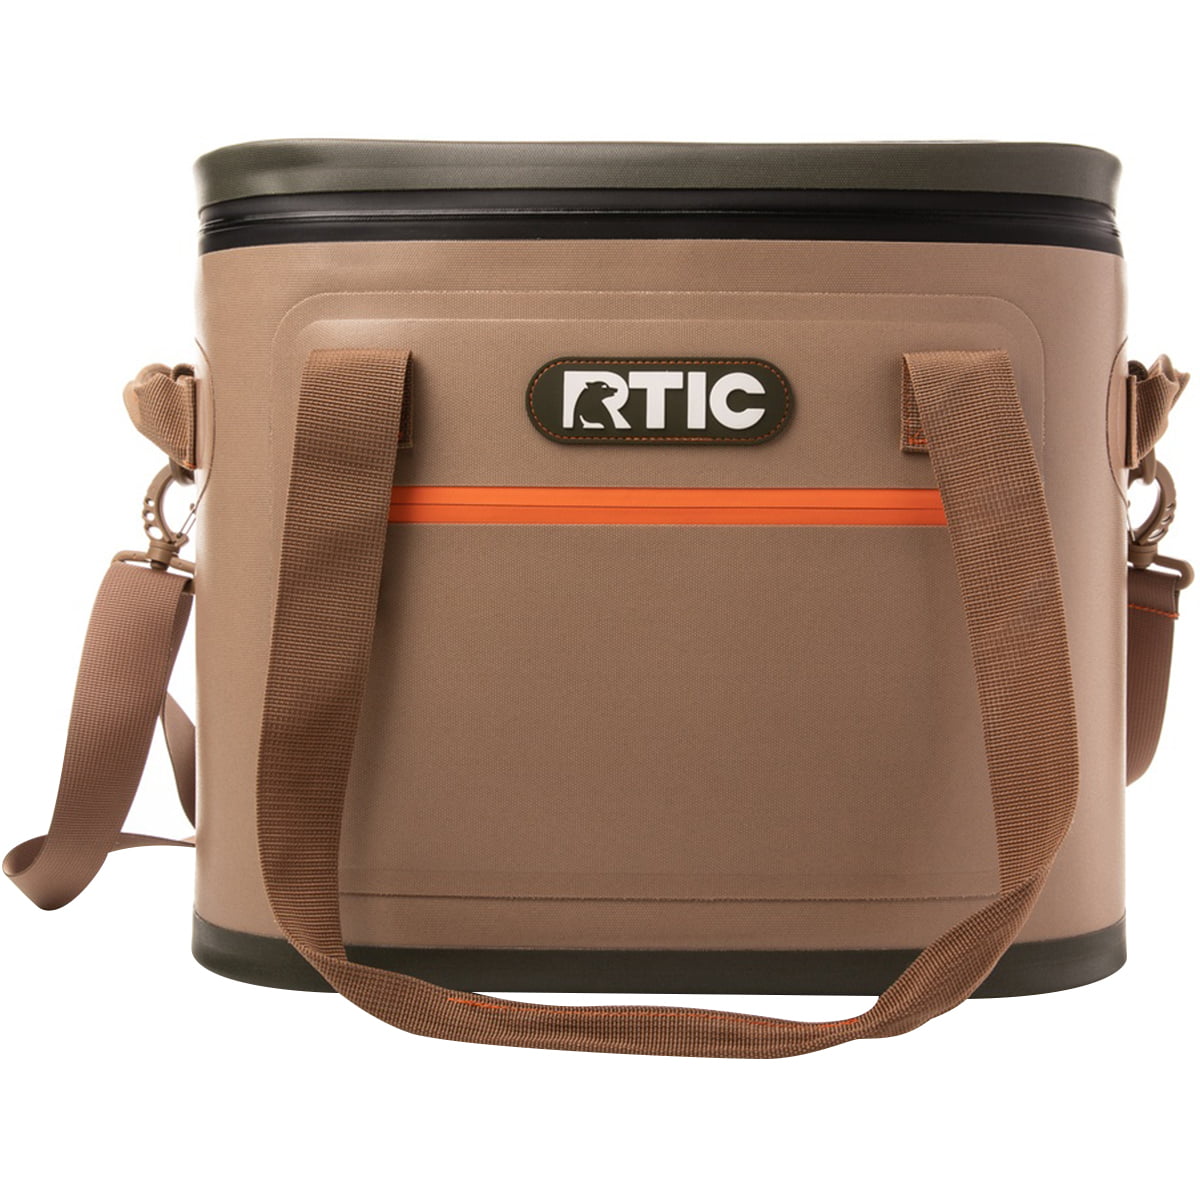 Cooler Insulated Bag Rtic Soft Pack Walmart.